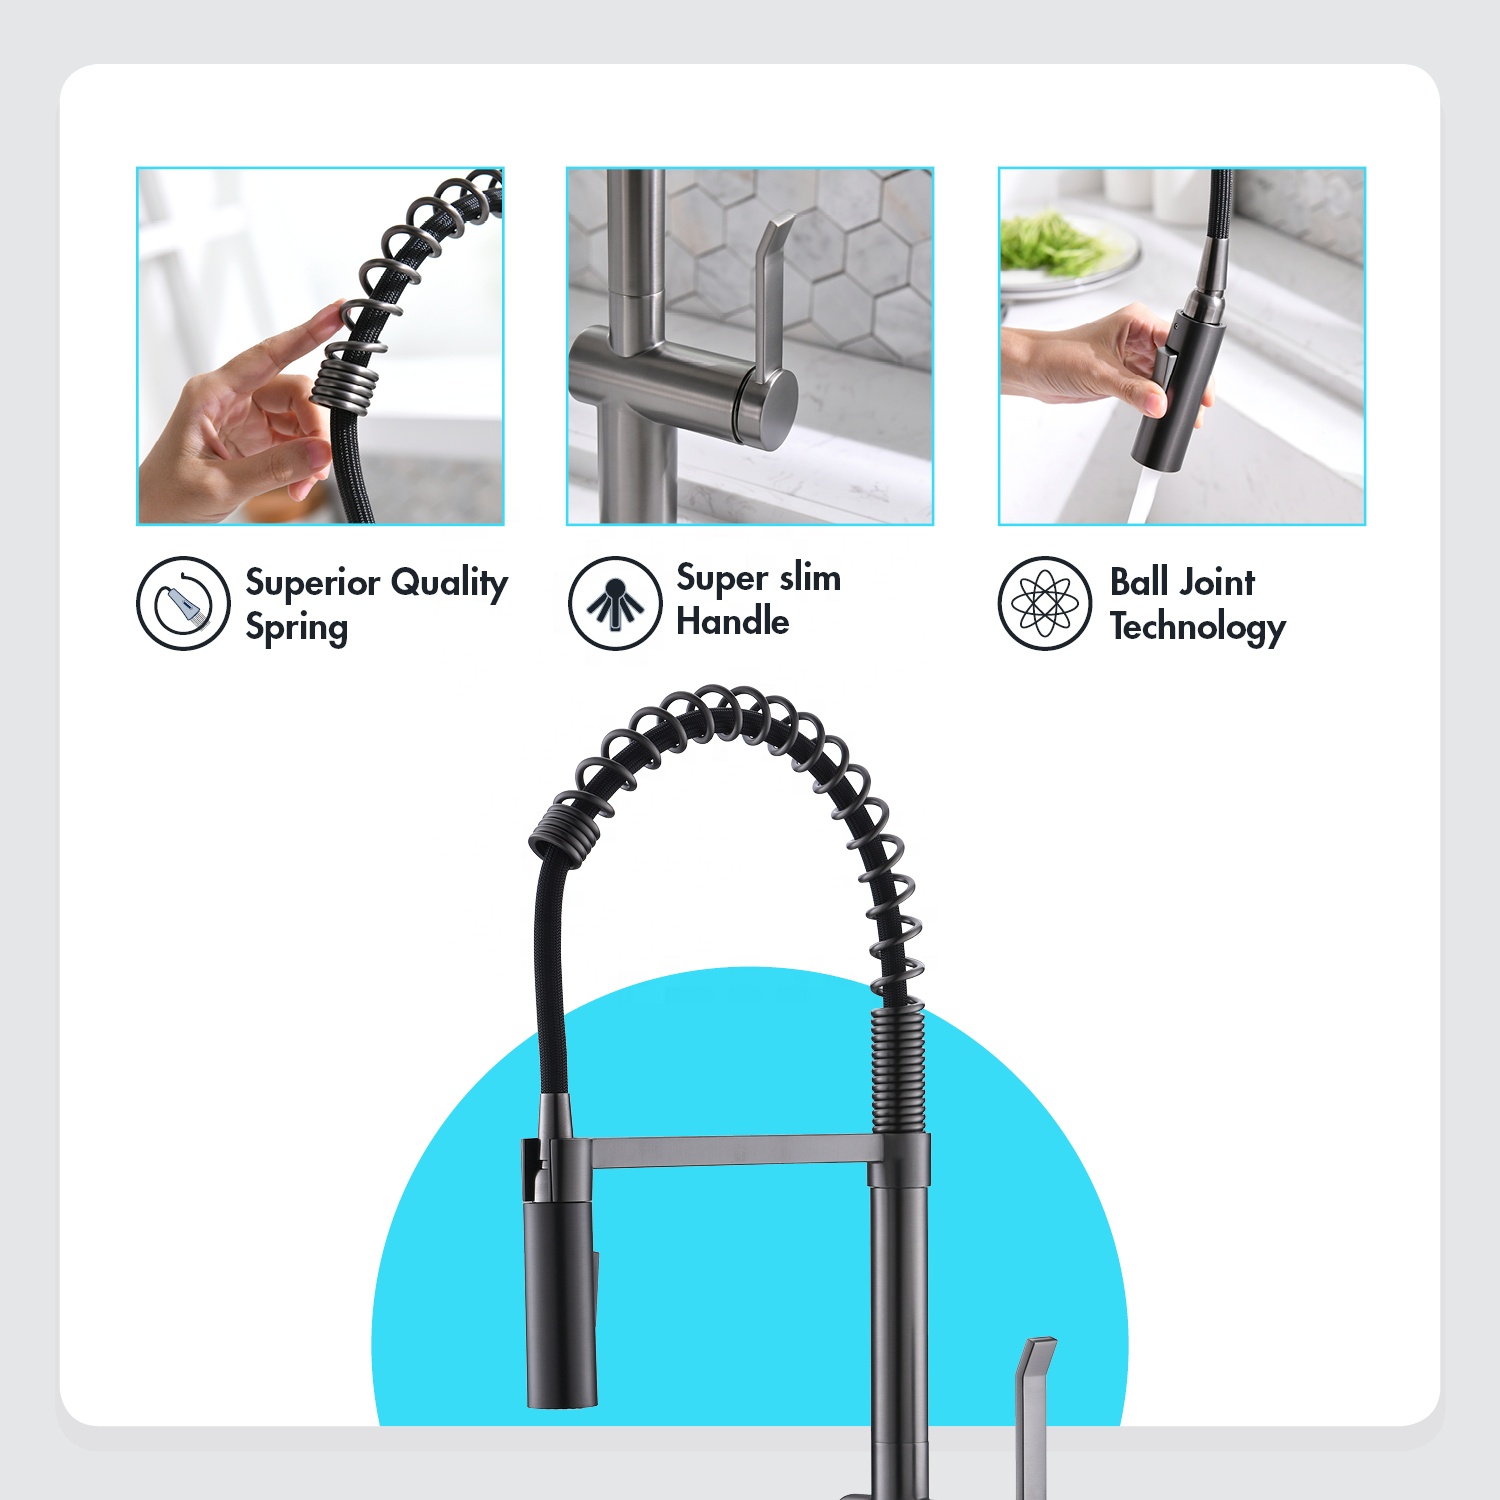 APS238-BS Commercial Faucet Stainless Steel Kitchen Sink Faucet Pull Down Sprayer Kitchen Faucet